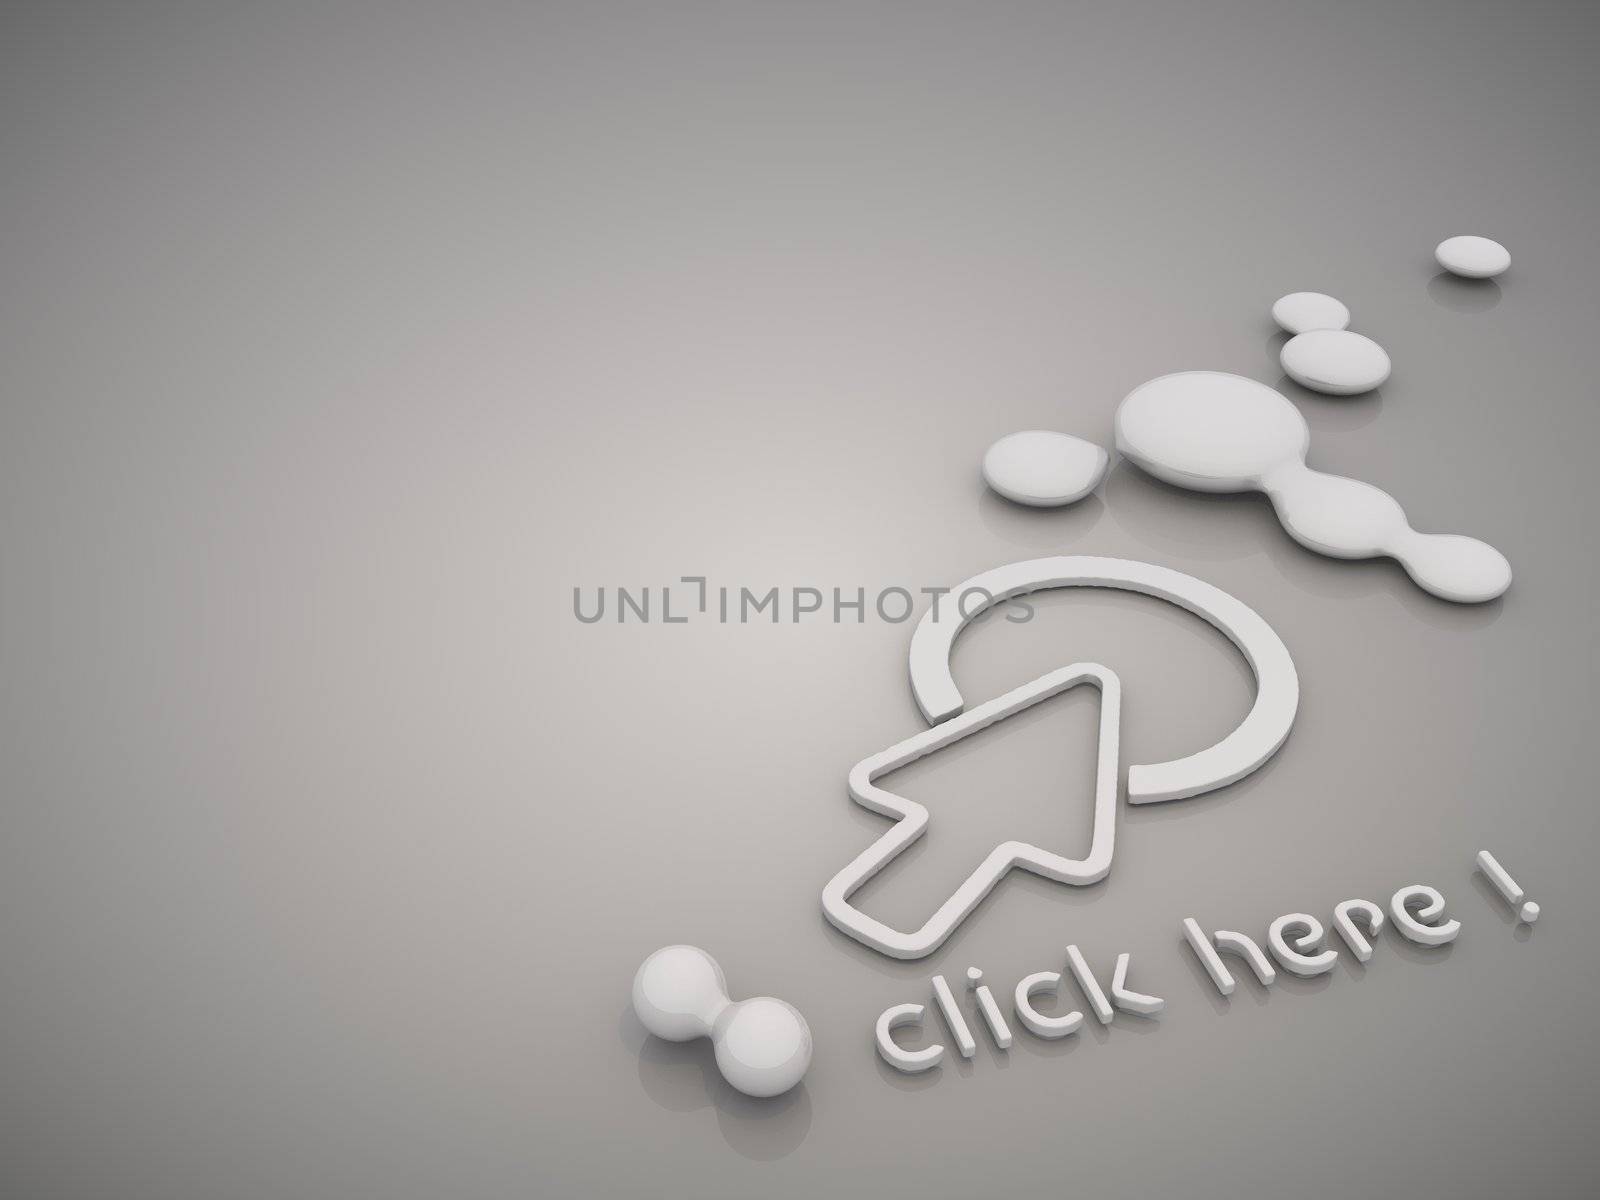 3D graphic Metallic click here symbol in a stylish grey background